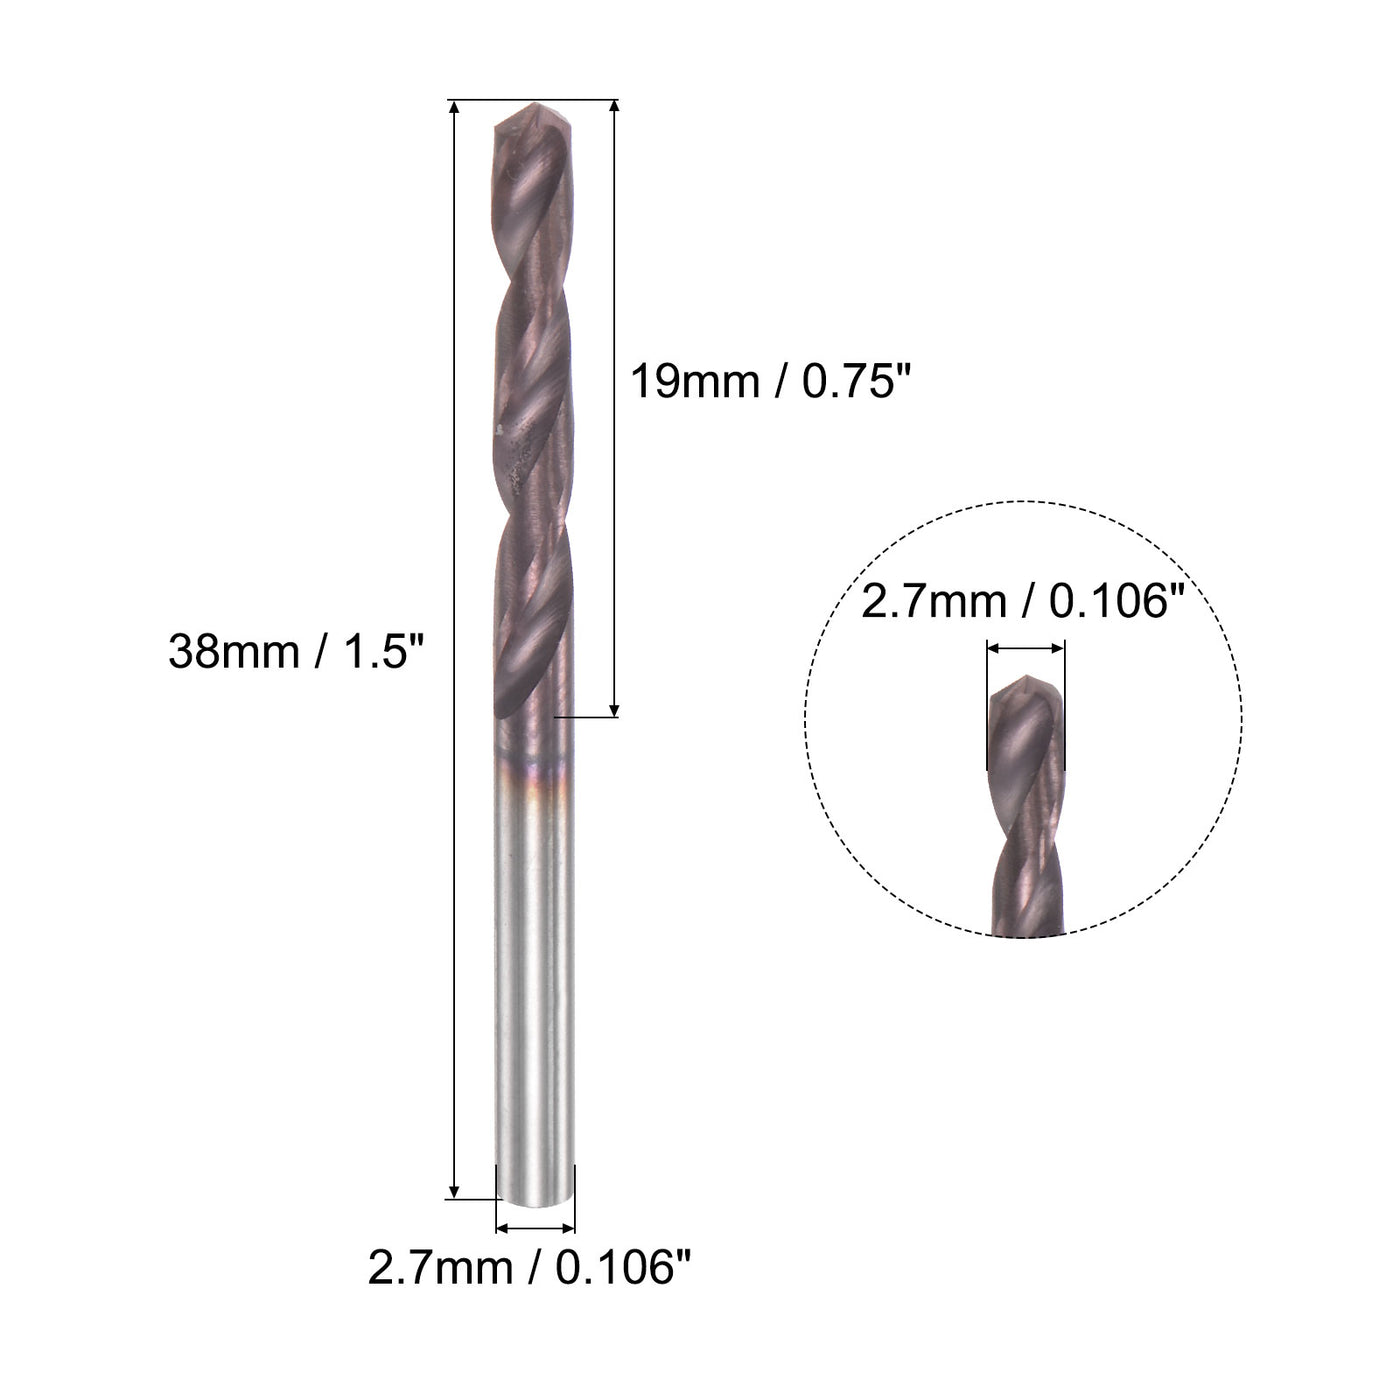 uxcell Uxcell 2.7mm DIN K45 Tungsten Carbide AlTiSin Coated Drill Bit for Stainless Steel